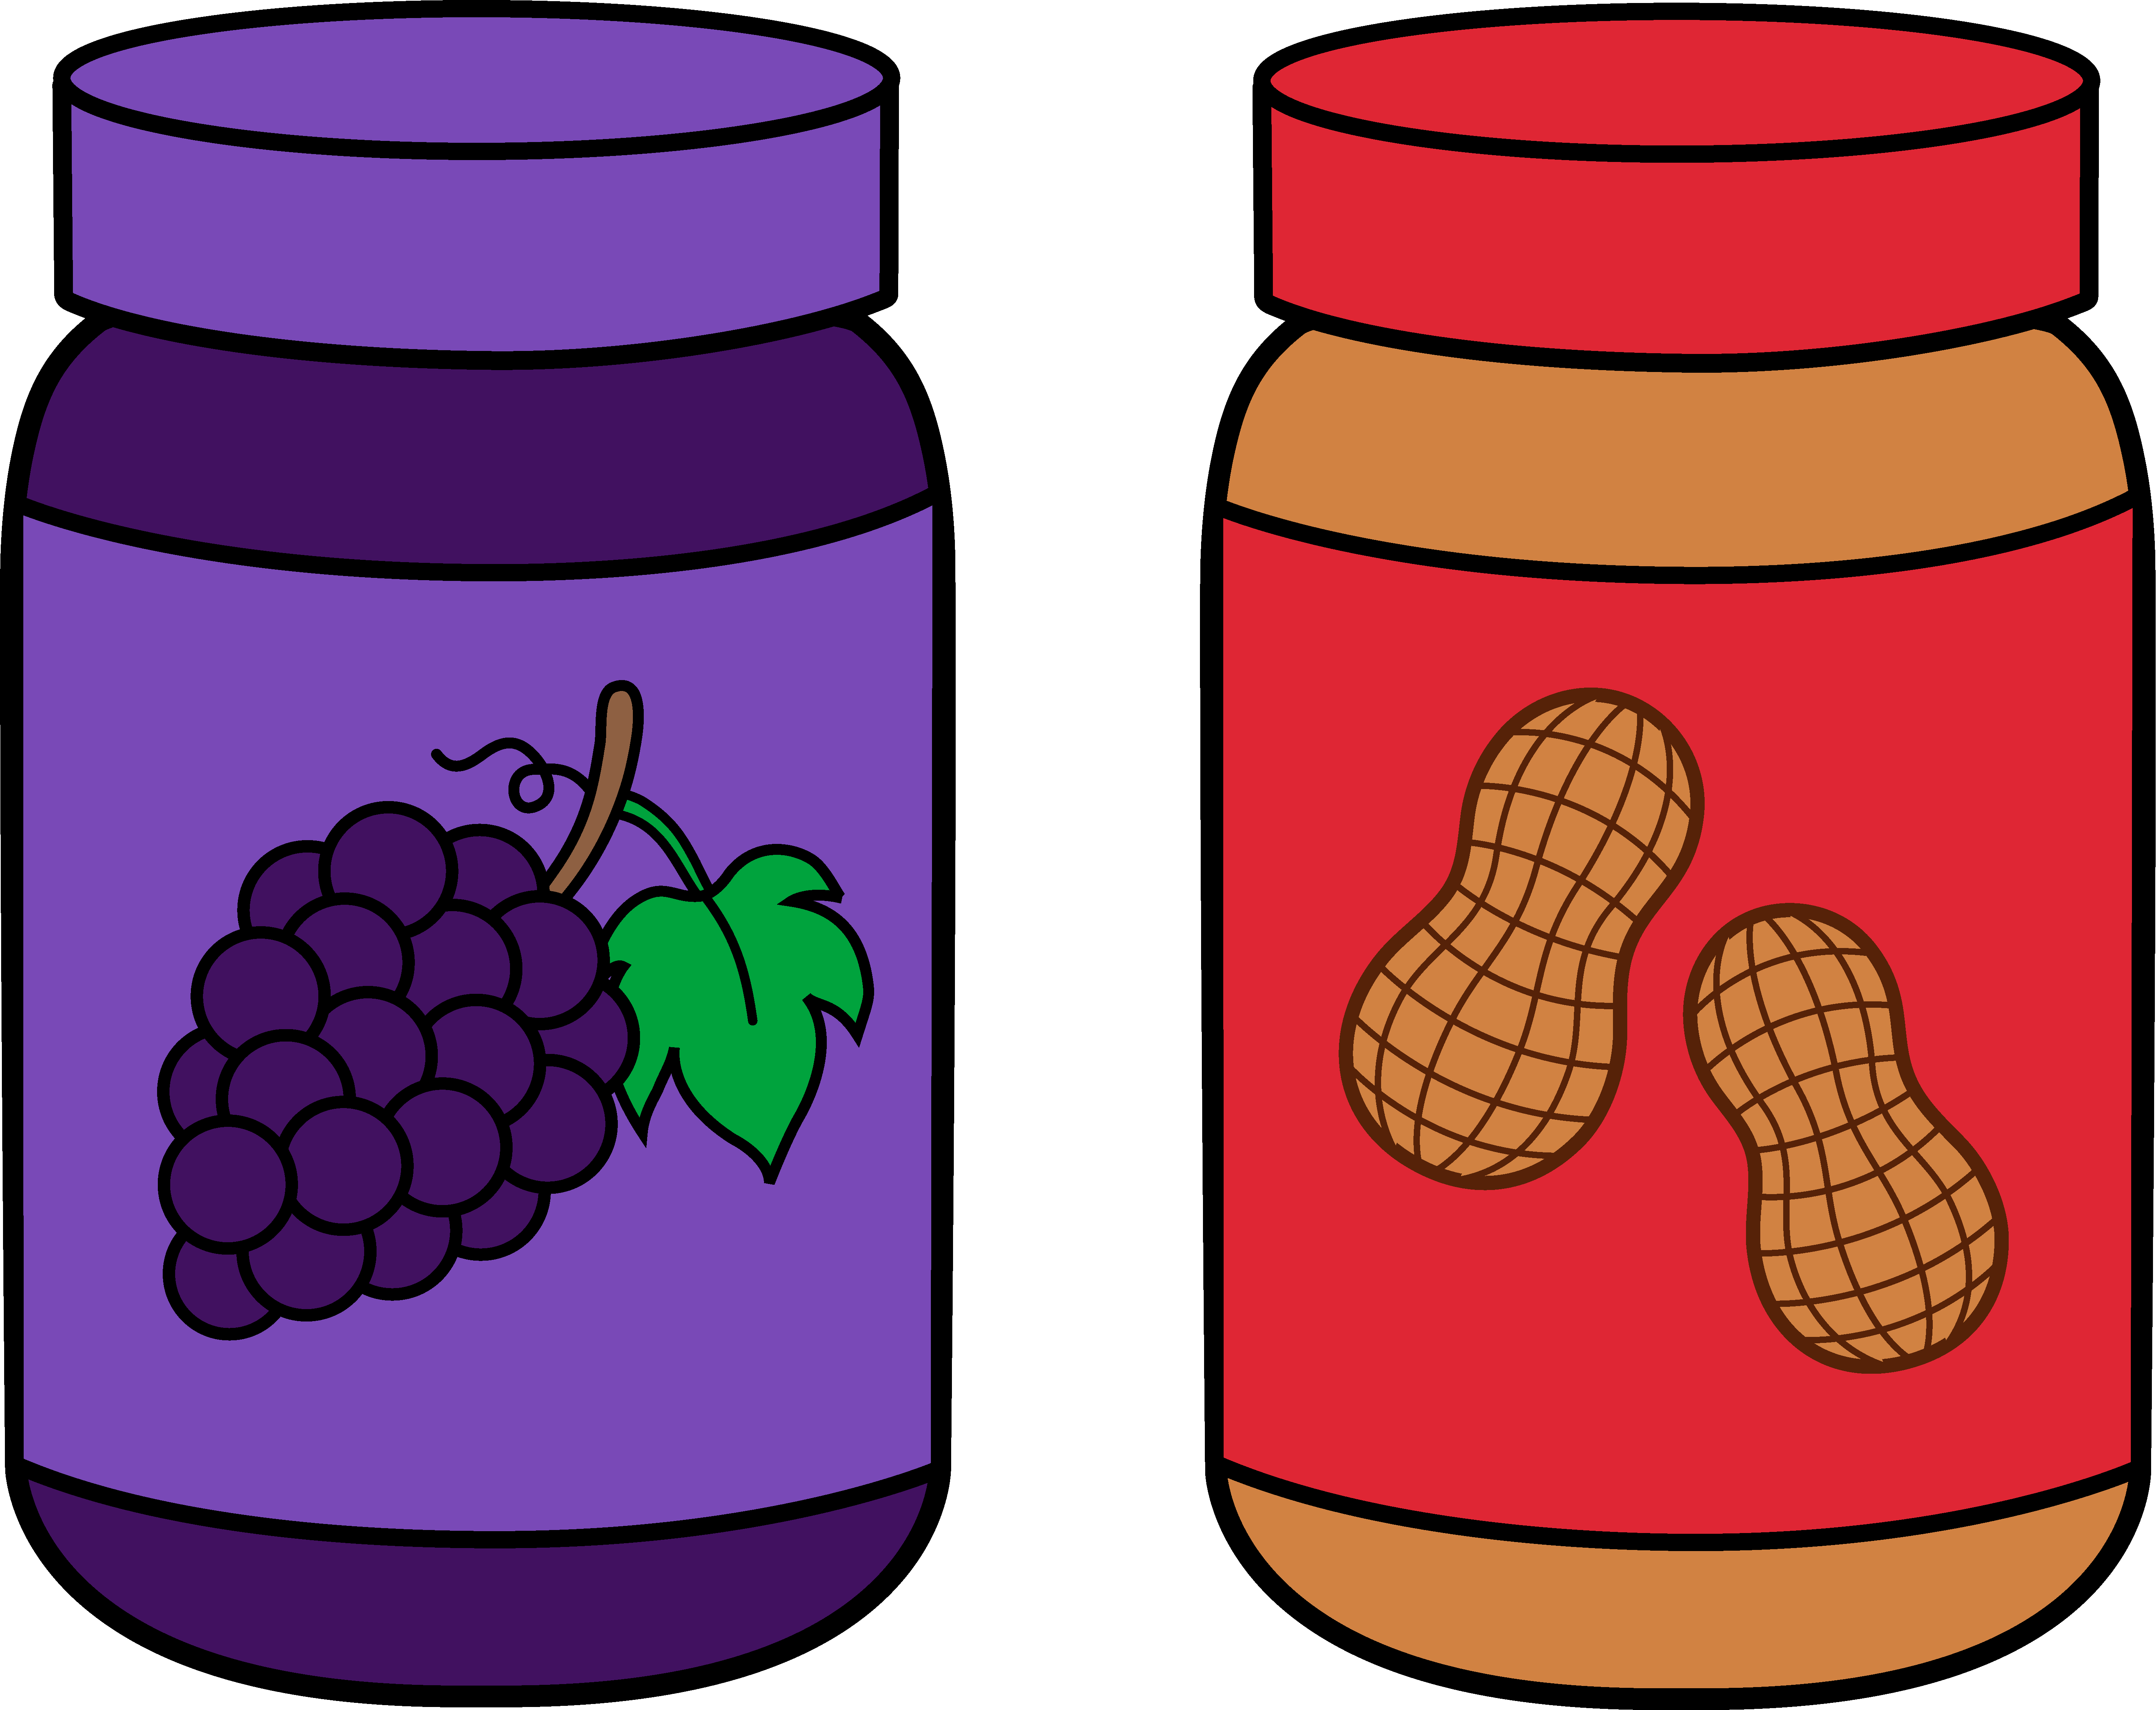 Peanut Butter And Jelly Clipart - Free Clipart Images